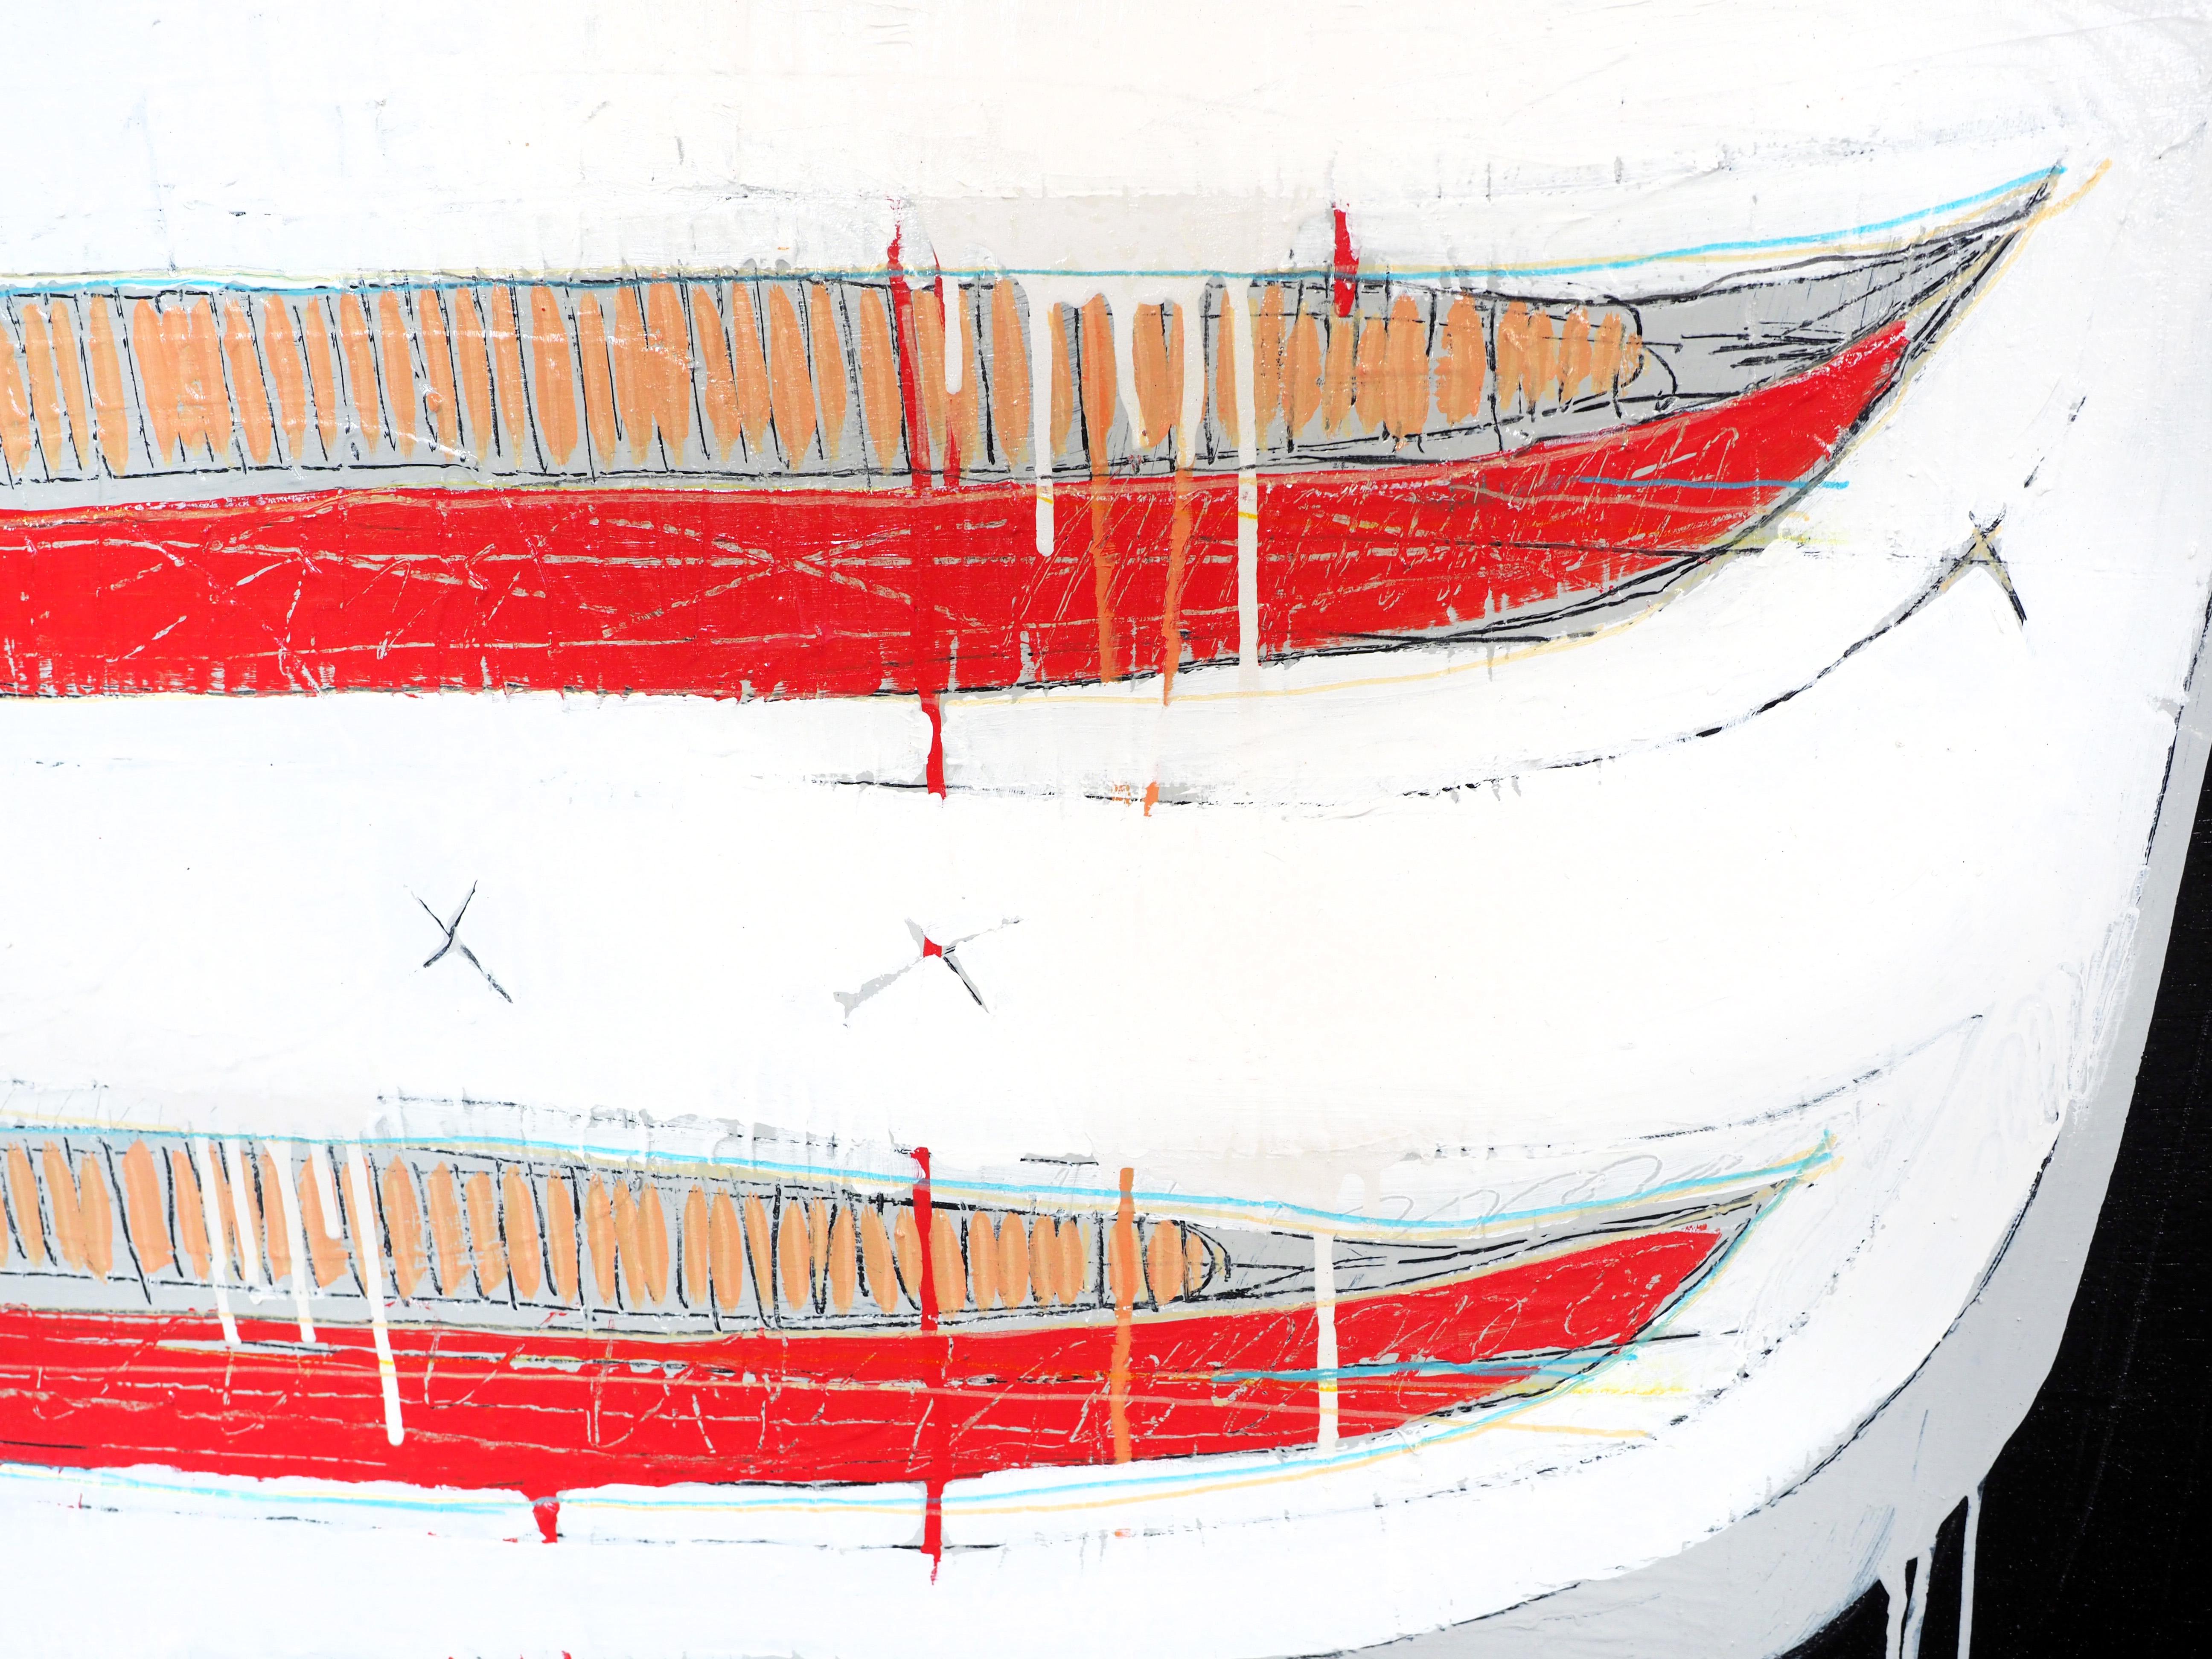 Manifest  All These Voices displays three canoes split in a minimalist space of white, black, and red with an intricate textured background. McAdoo's Manifest series depicts the creative stupor of the need to return to the foundational elements of